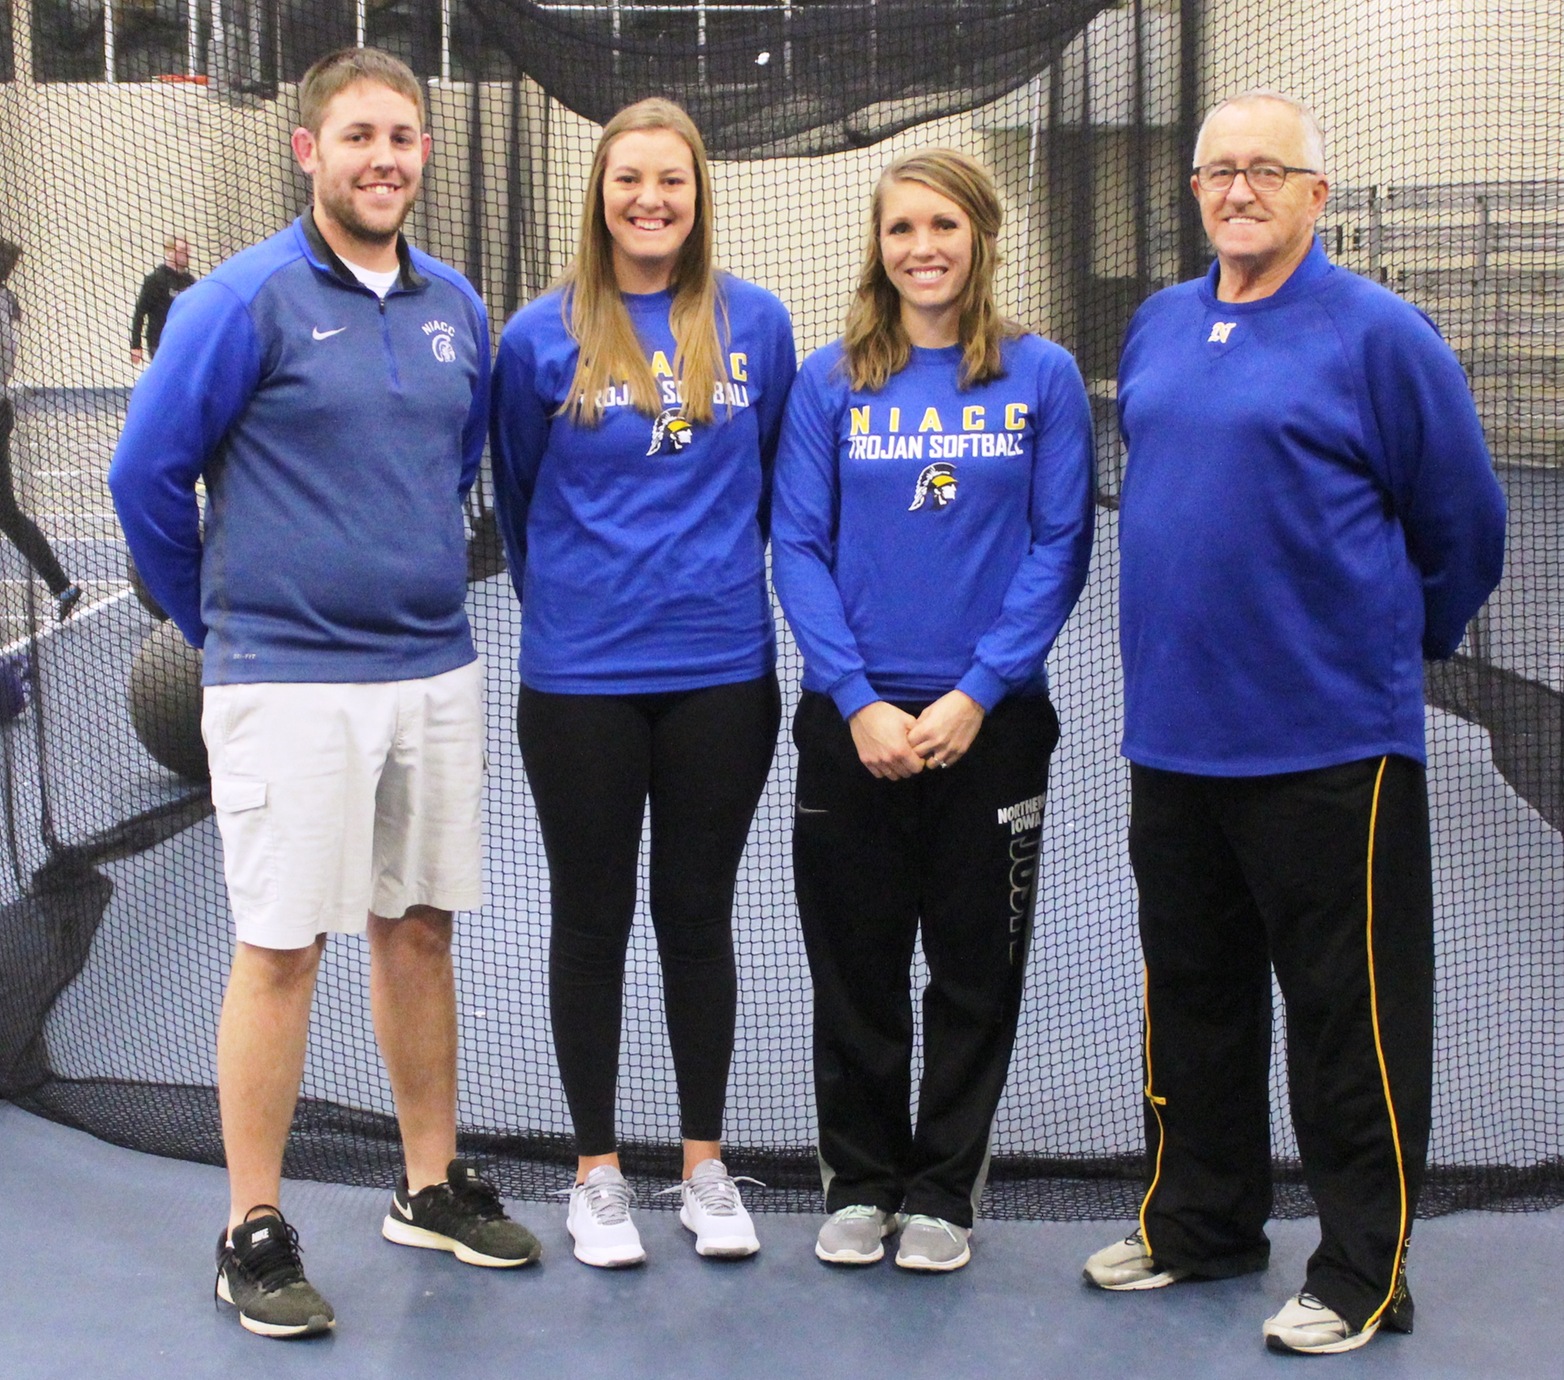 NIACC softball coaches from left: head coach Dan Gratz and assistant coaches Halie Greenwood, Jamie Kruger and Bob Horner.